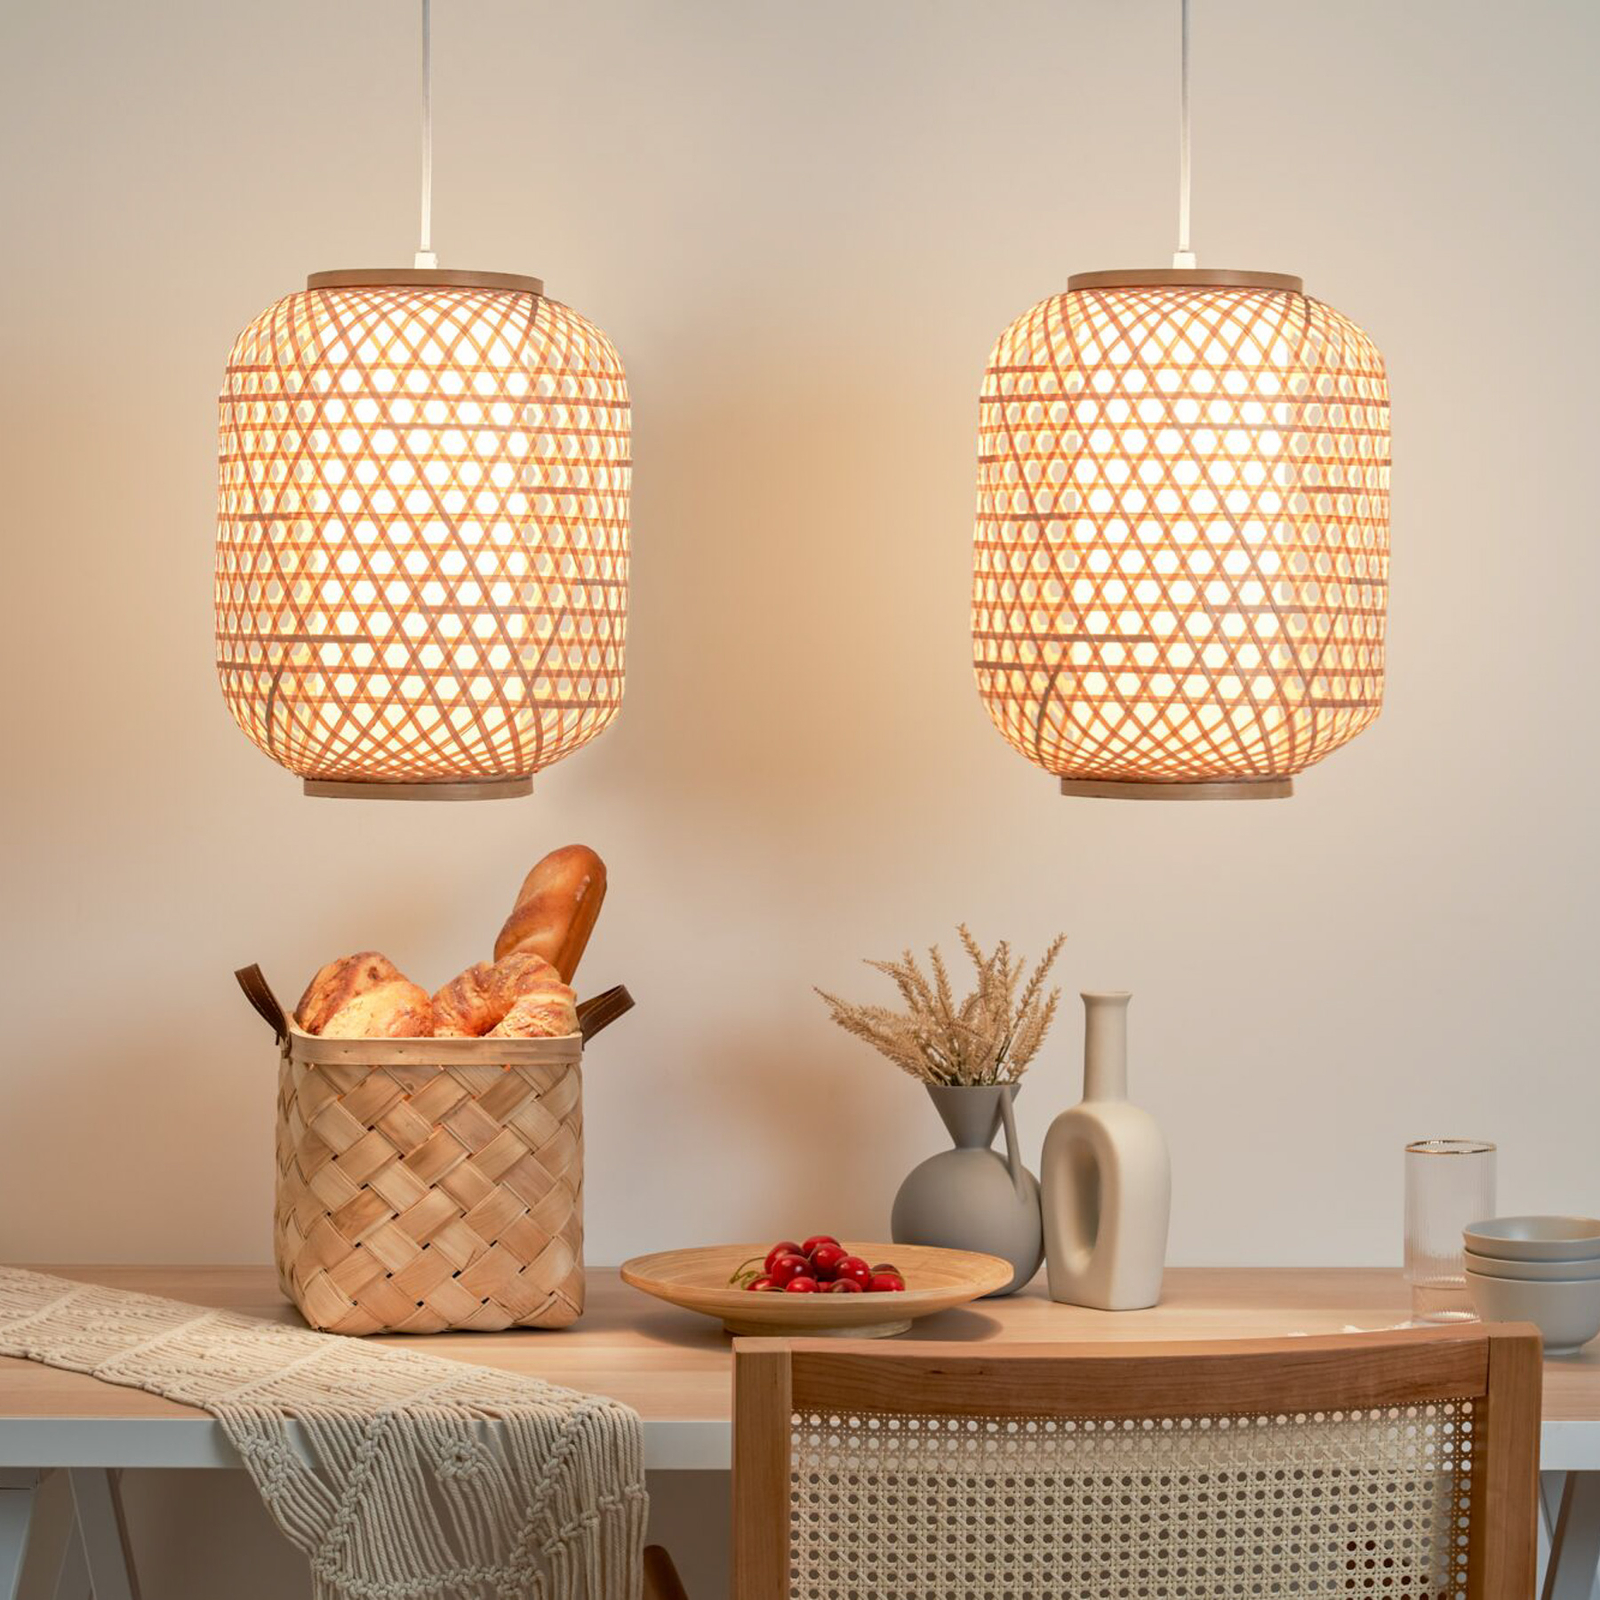 Pauleen Woody Delight hanging light made of bamboo